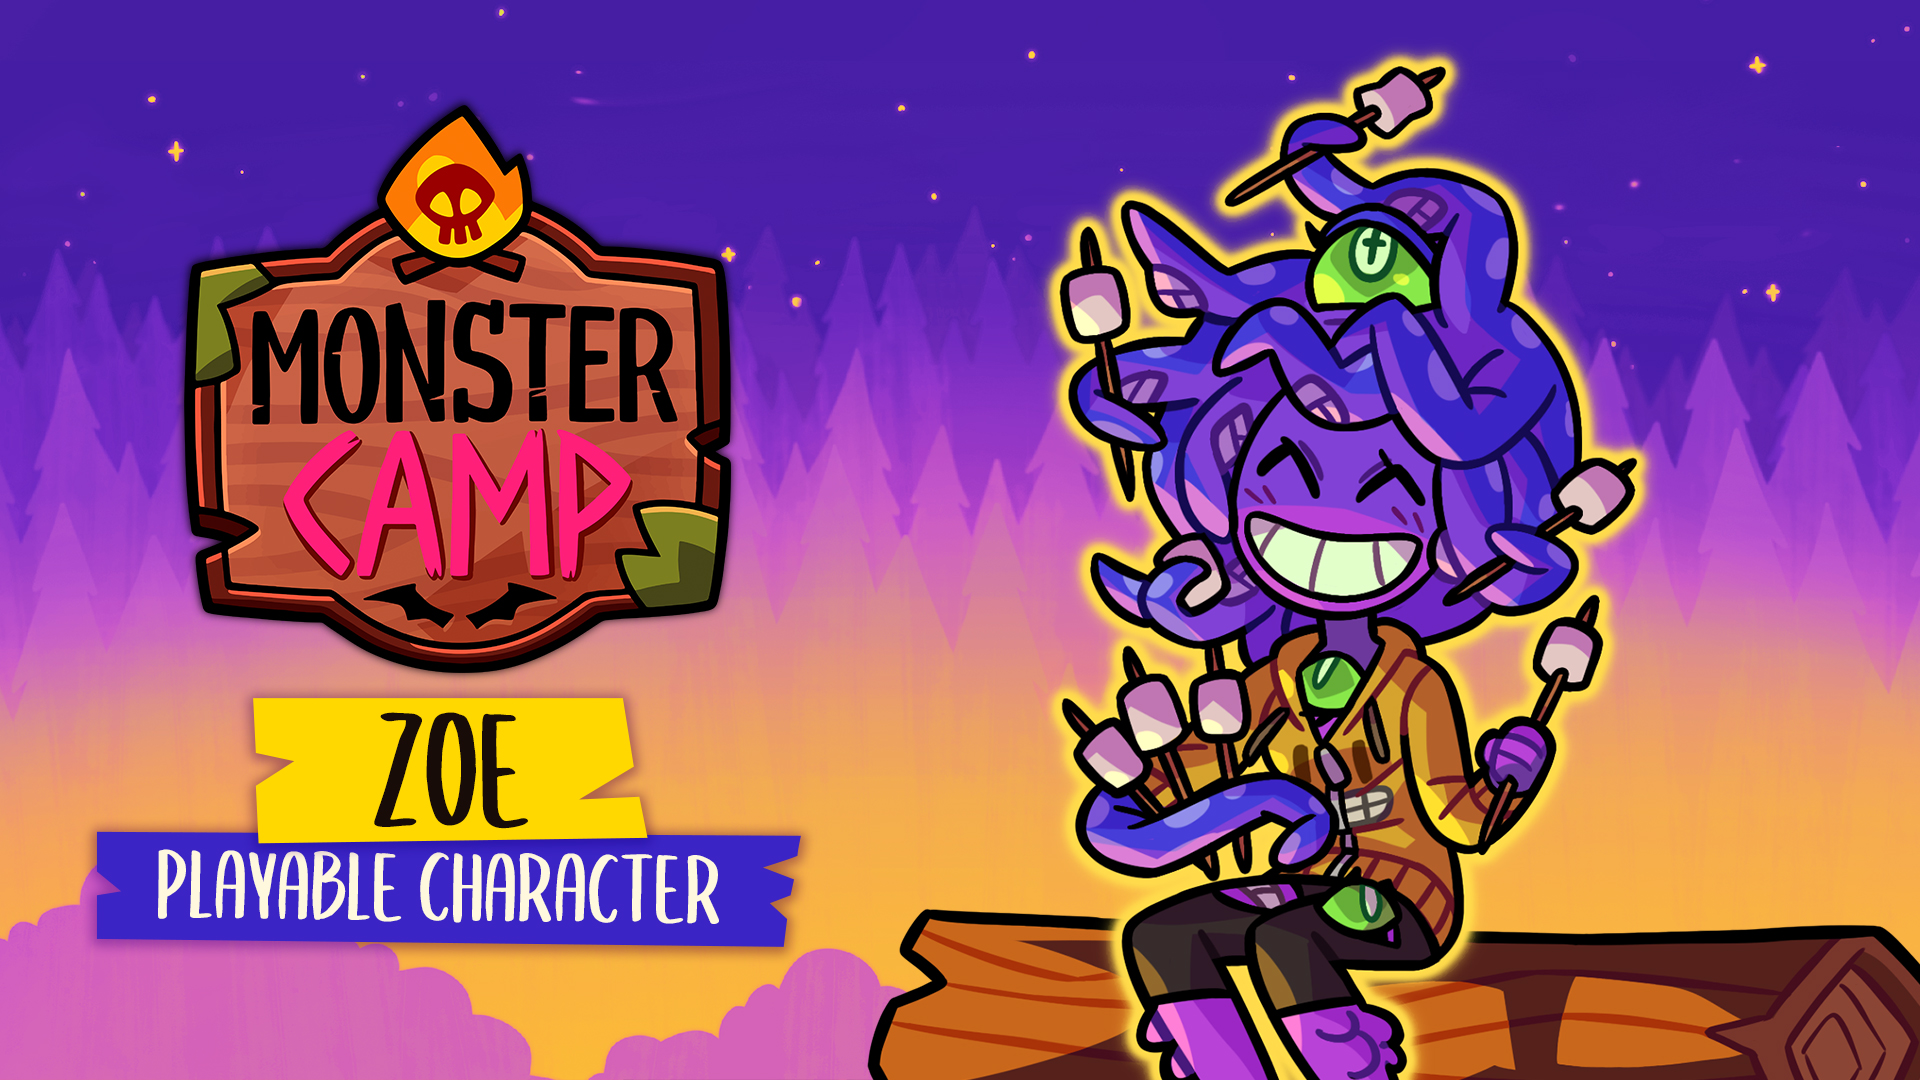 Monster Camp Character Pack - Zoe